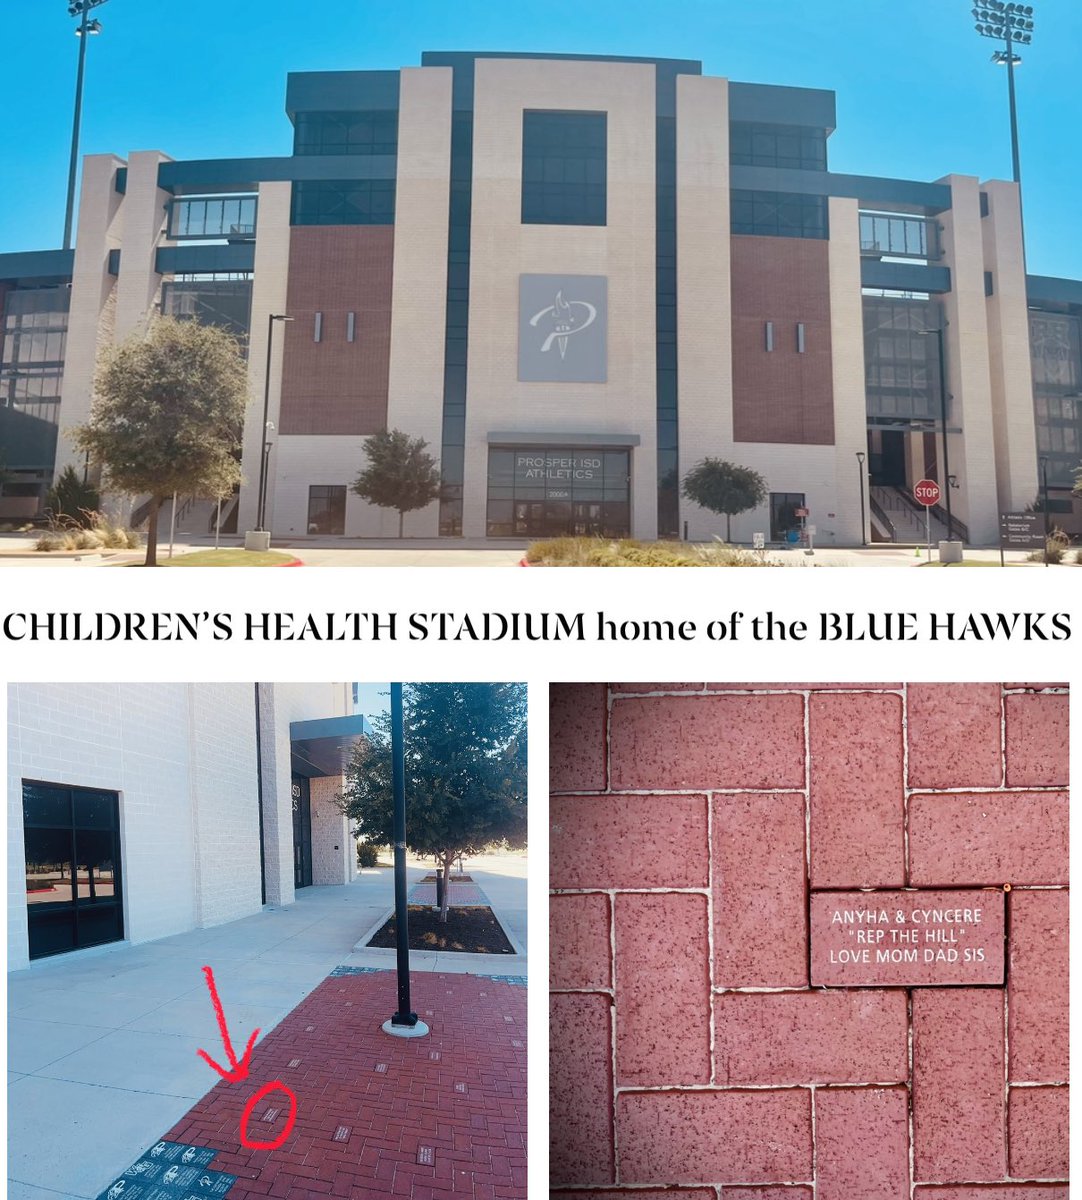 “Etched in Stone at Home”  Thanking our Family, Prosper-ISD, & Children’s Health!! @RockHill_FB @ProsperISD @childrenshealth #RepDaHillAlways #PrideInCommunity #WeElectricBlue